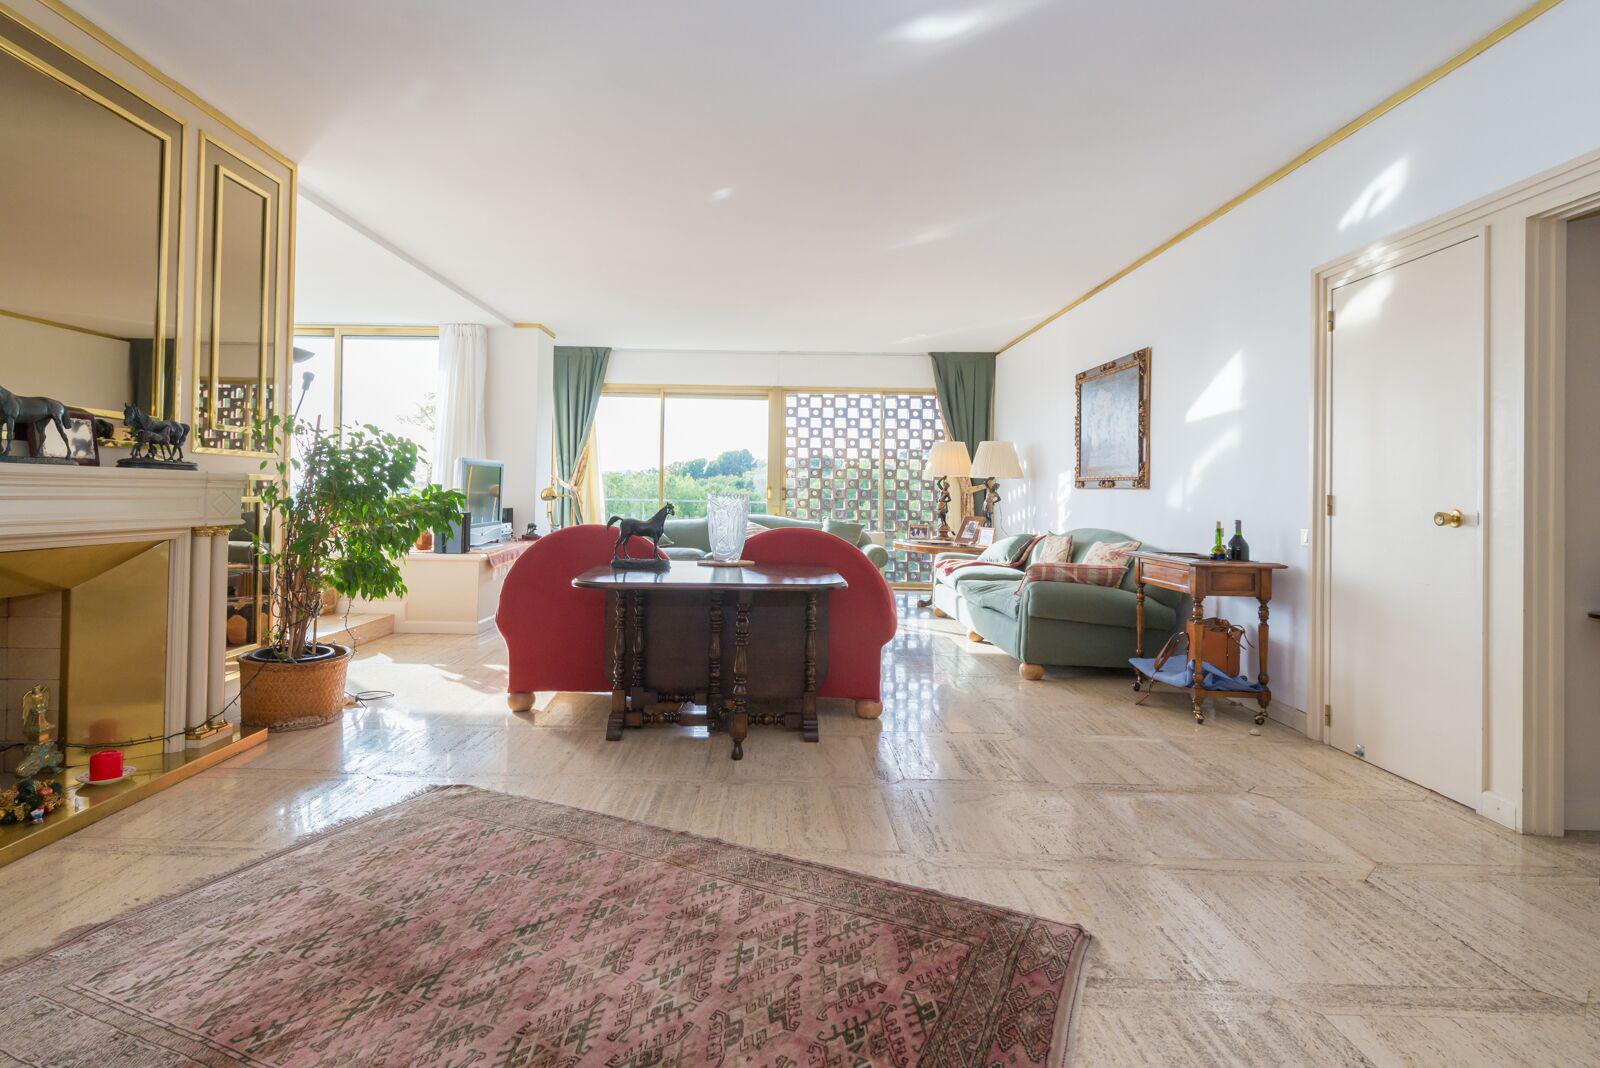 80454 Flat for sale in Les Corts, Pedralbes 4